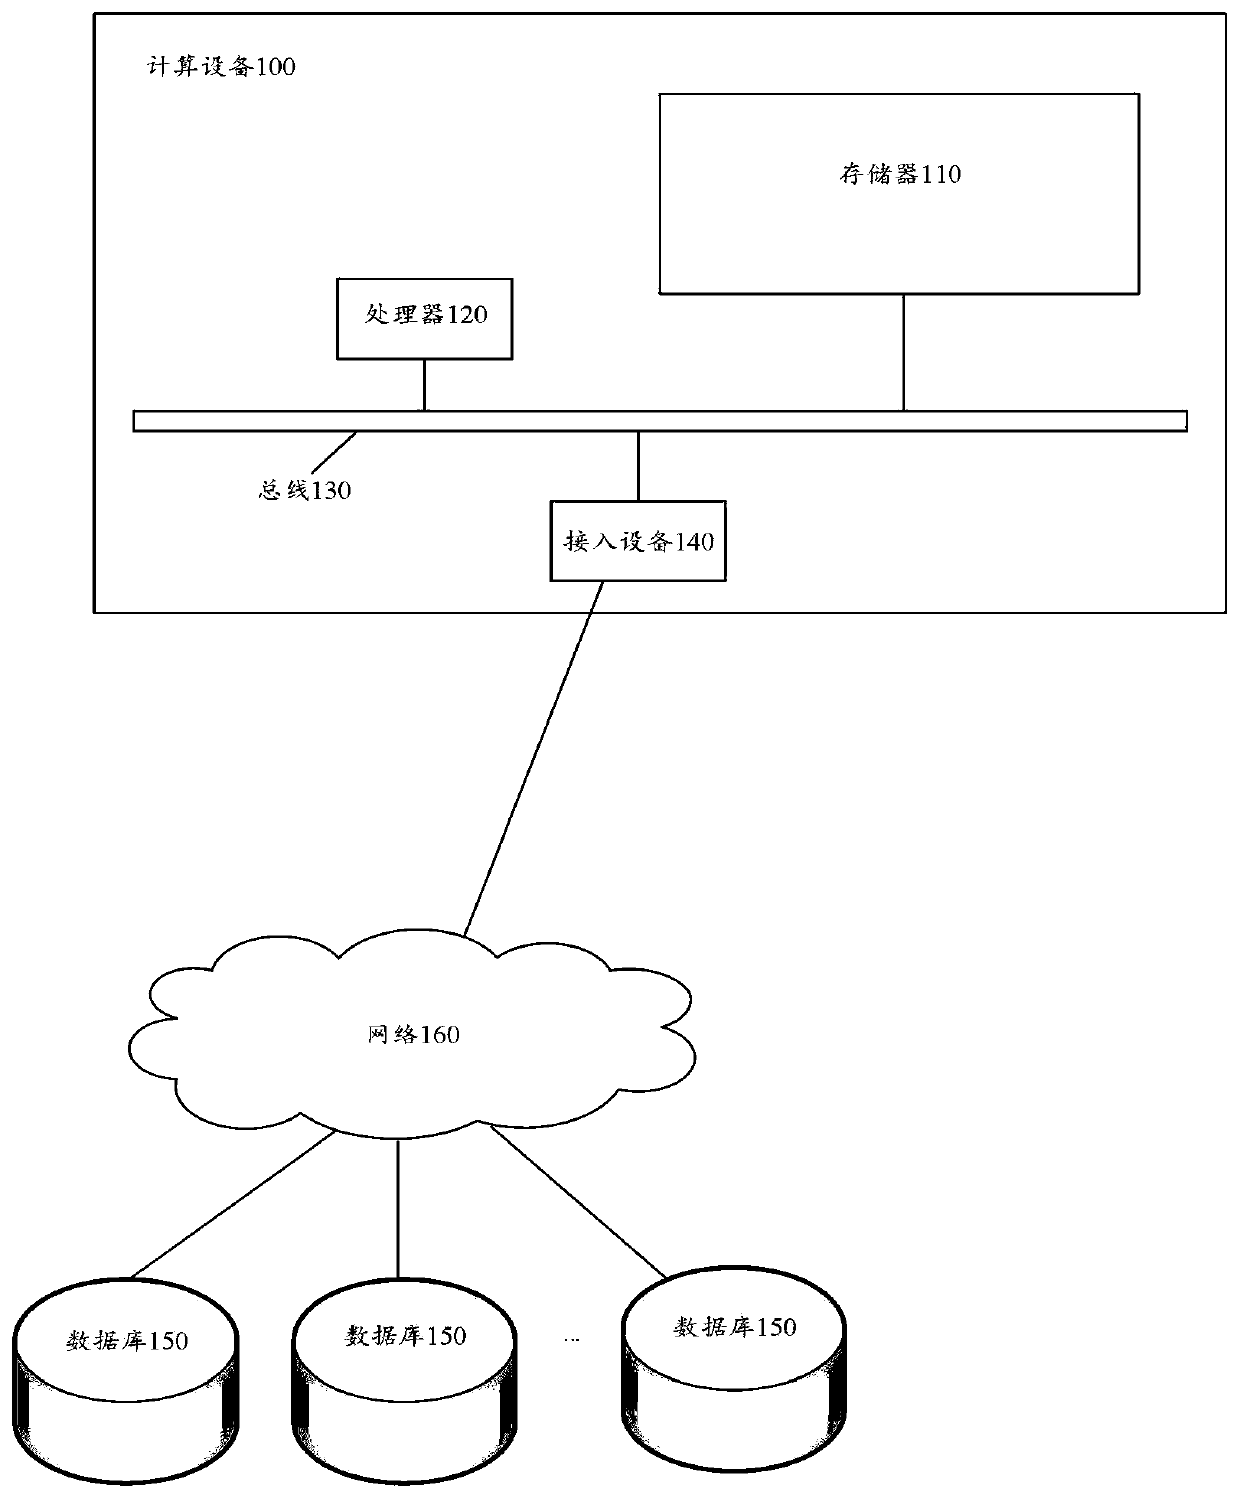 Picture-based text generation method and device